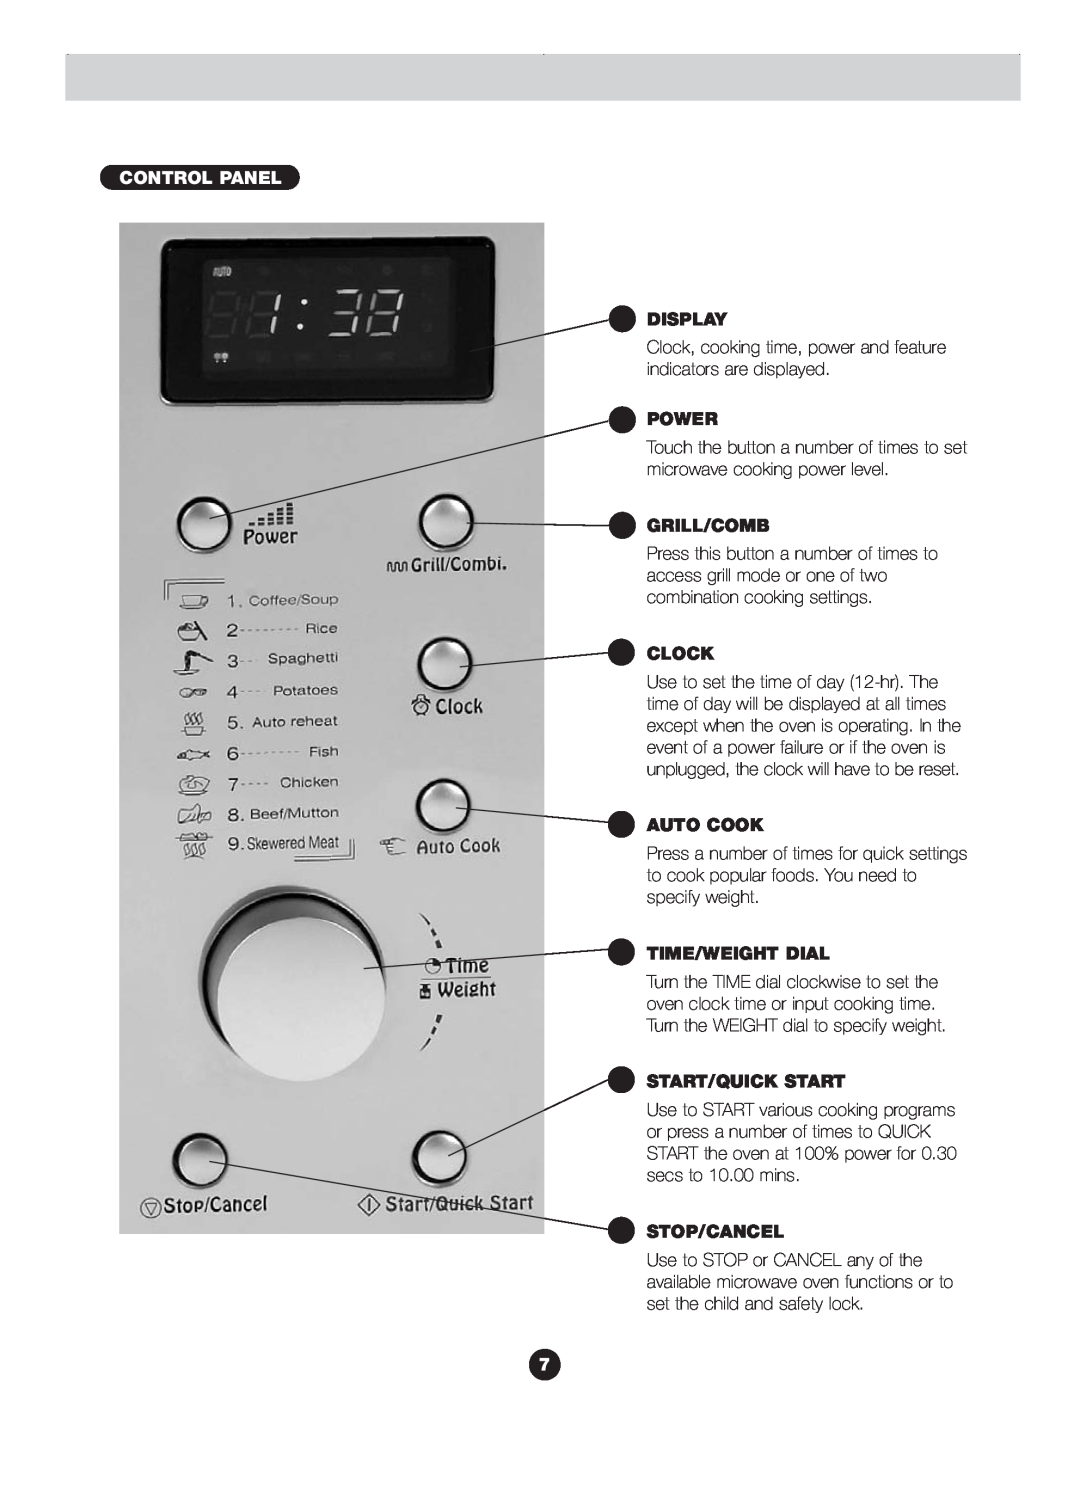 Blanco B 830FX Control Panel, Display, Power, Grill/Comb, Clock, Auto Cook, Time/Weight Dial, Start/Quick Start 